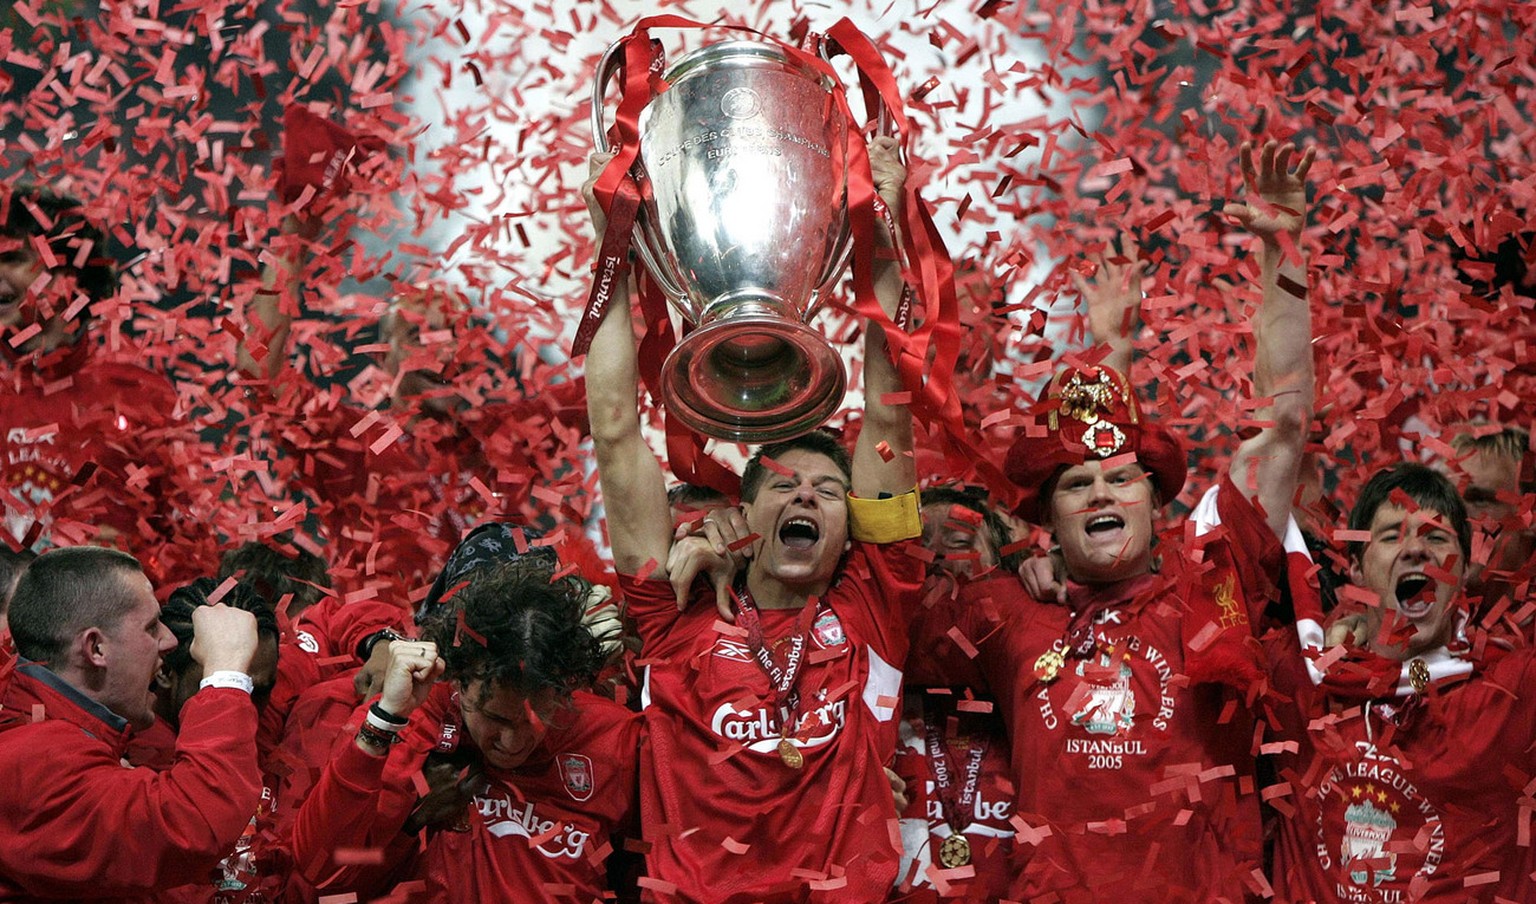 Liverpool&#039;s captain Steven Gerrard, center, lifts the Champions League trophy at The Ataturk Olympic Stadium, Istanbul, Turkey, Wednesday May 25, 2005. Liverpool won the Champions League final be ...